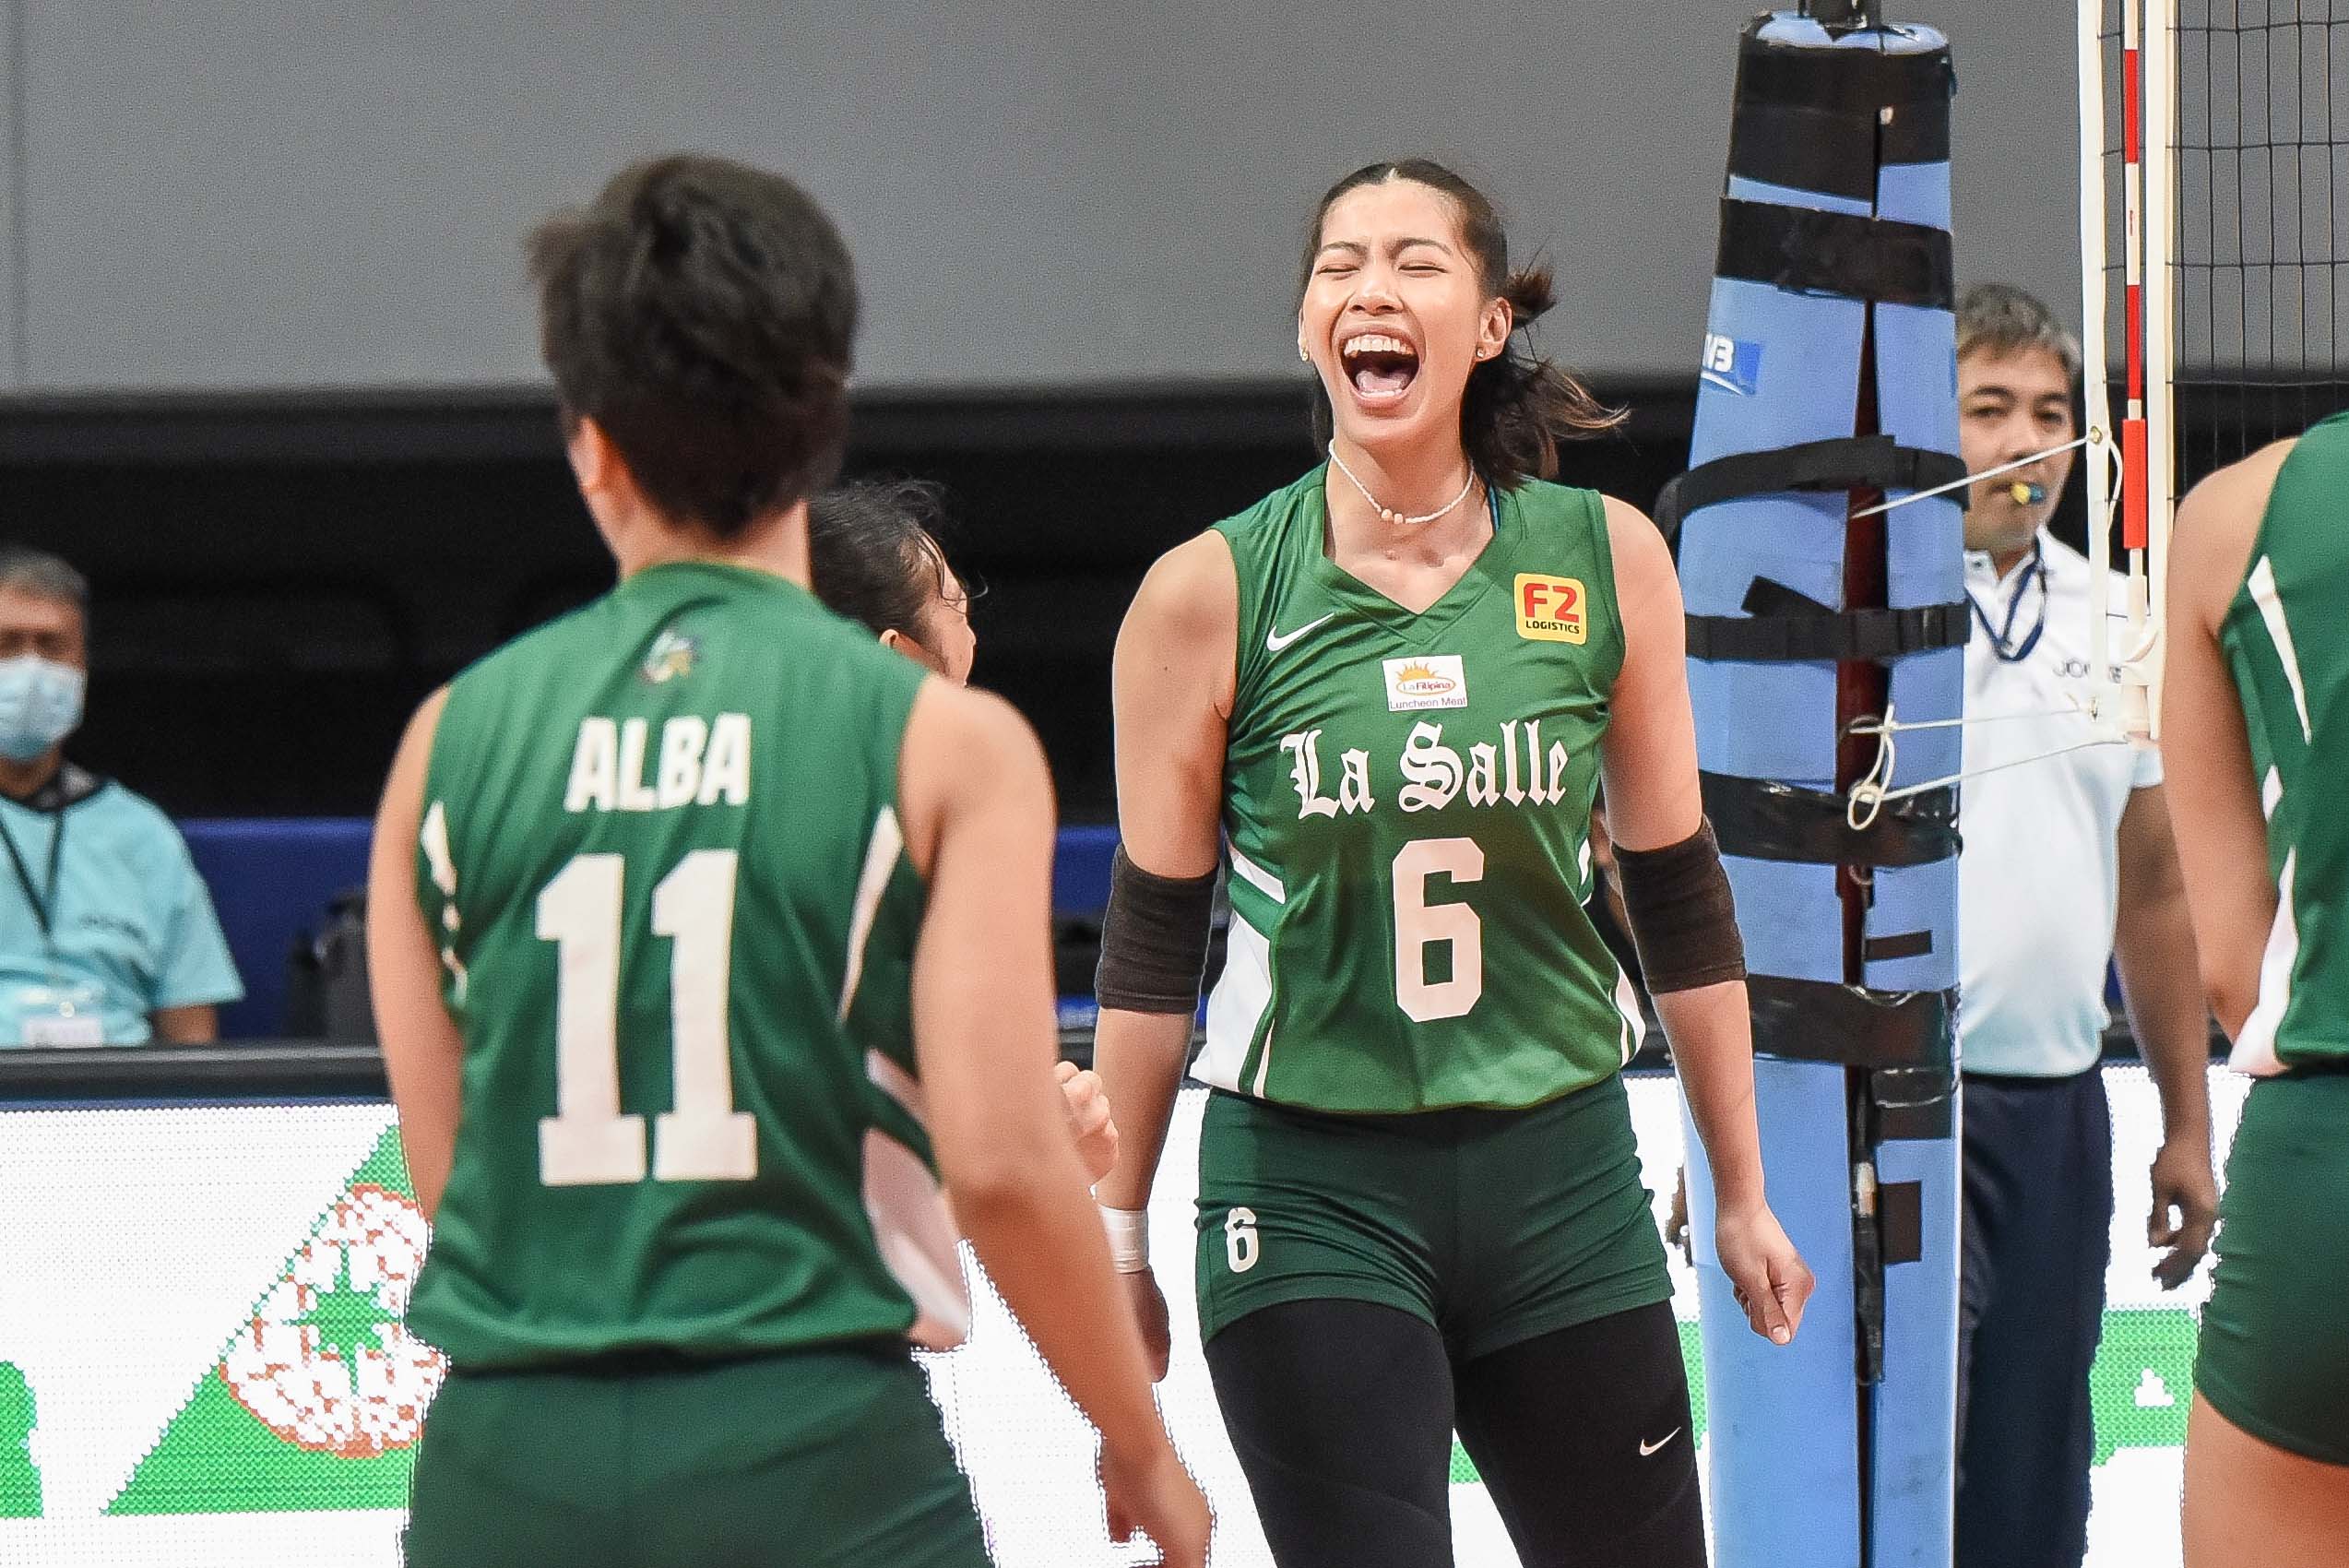 Uaap La Salle Climbs To No 2 Sends Up To 3rd Straight Loss